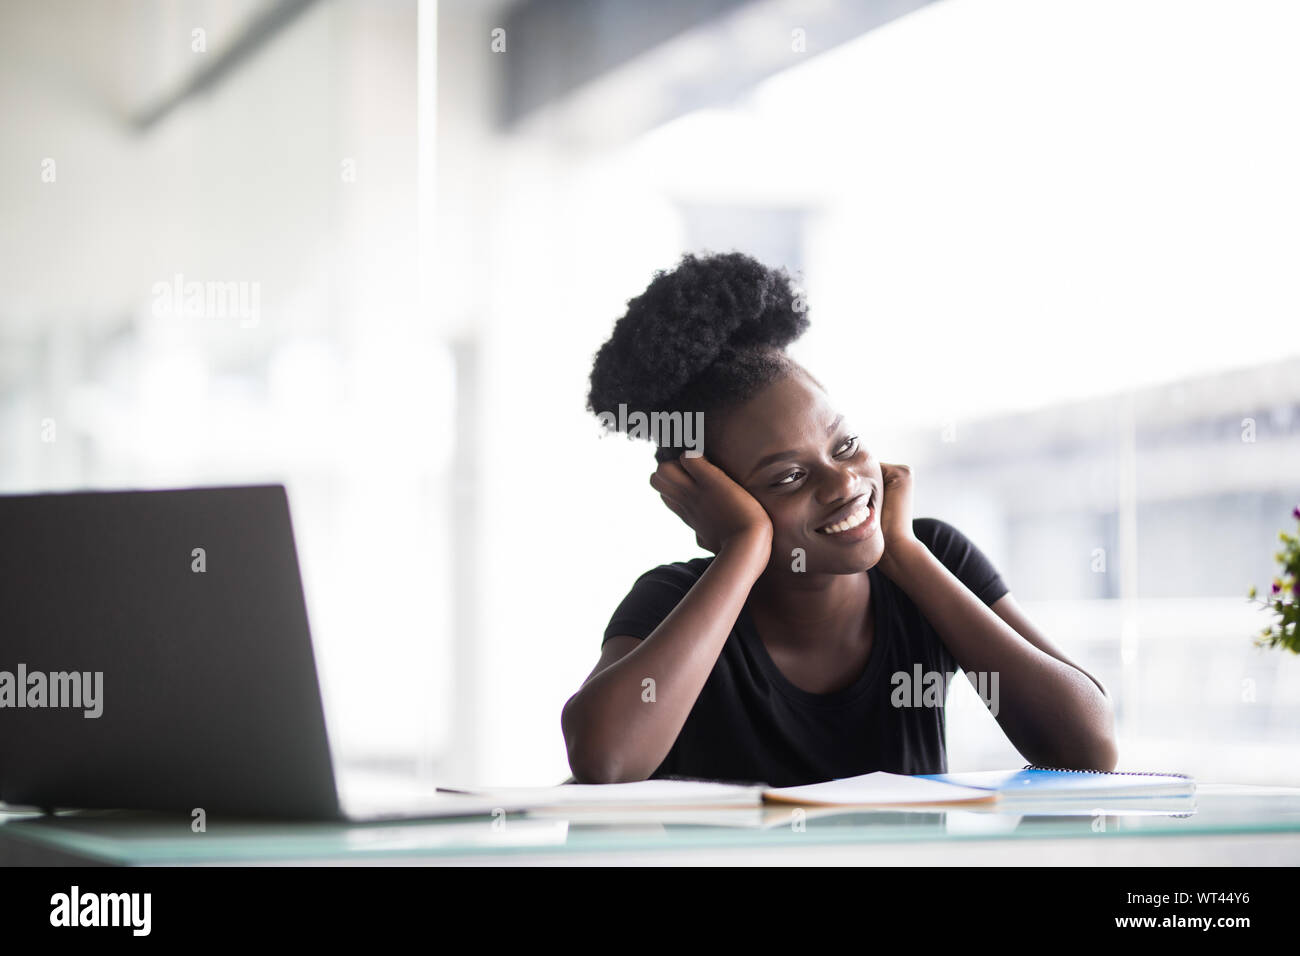 Portrait of young woman working on laptop in office Banque D'Images